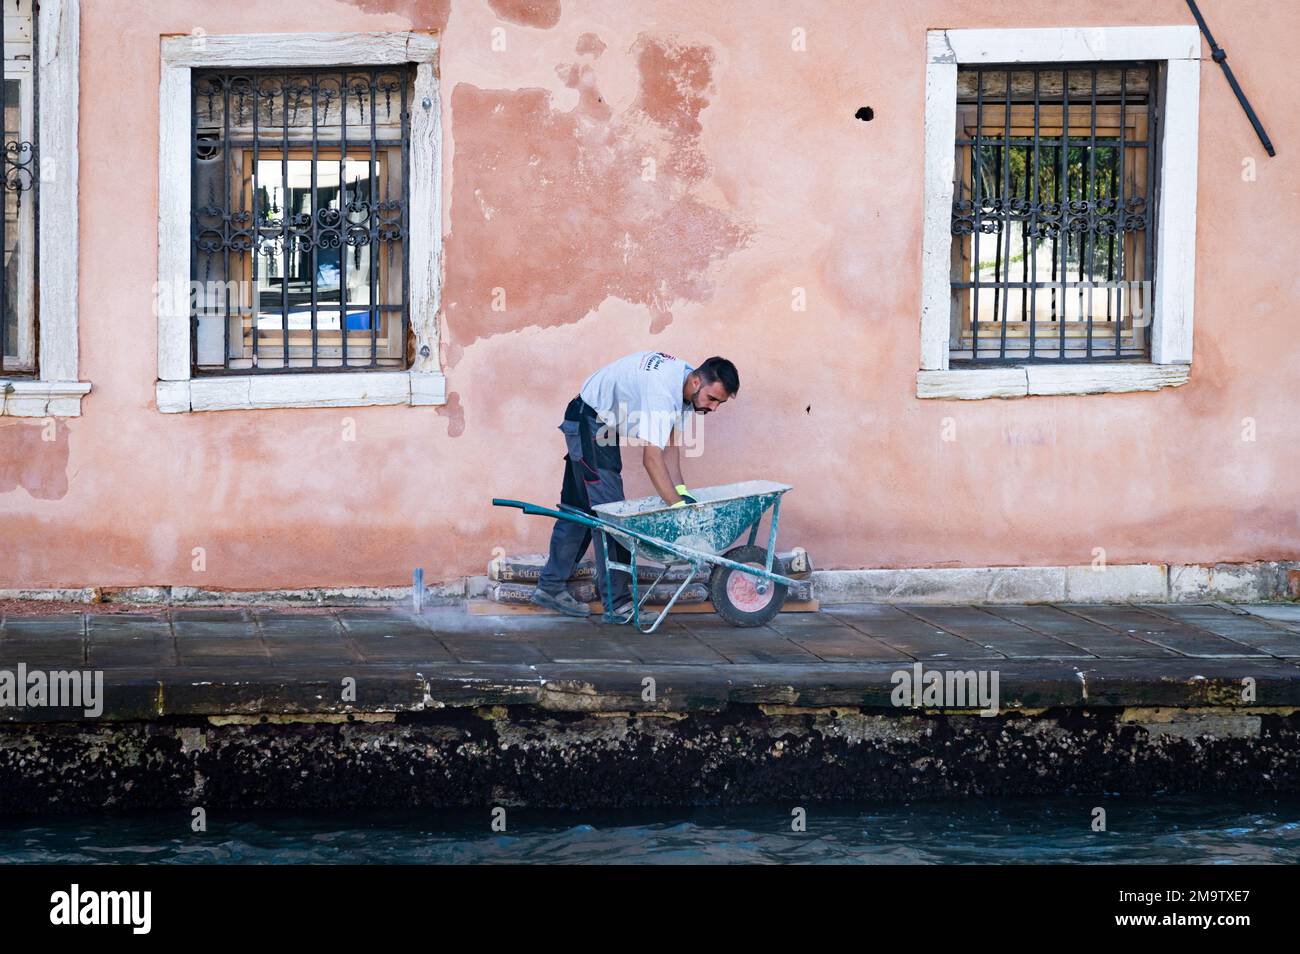 A construction worker works on patching the colorful side of a building in Venice on the Grand Canal. Stock Photo